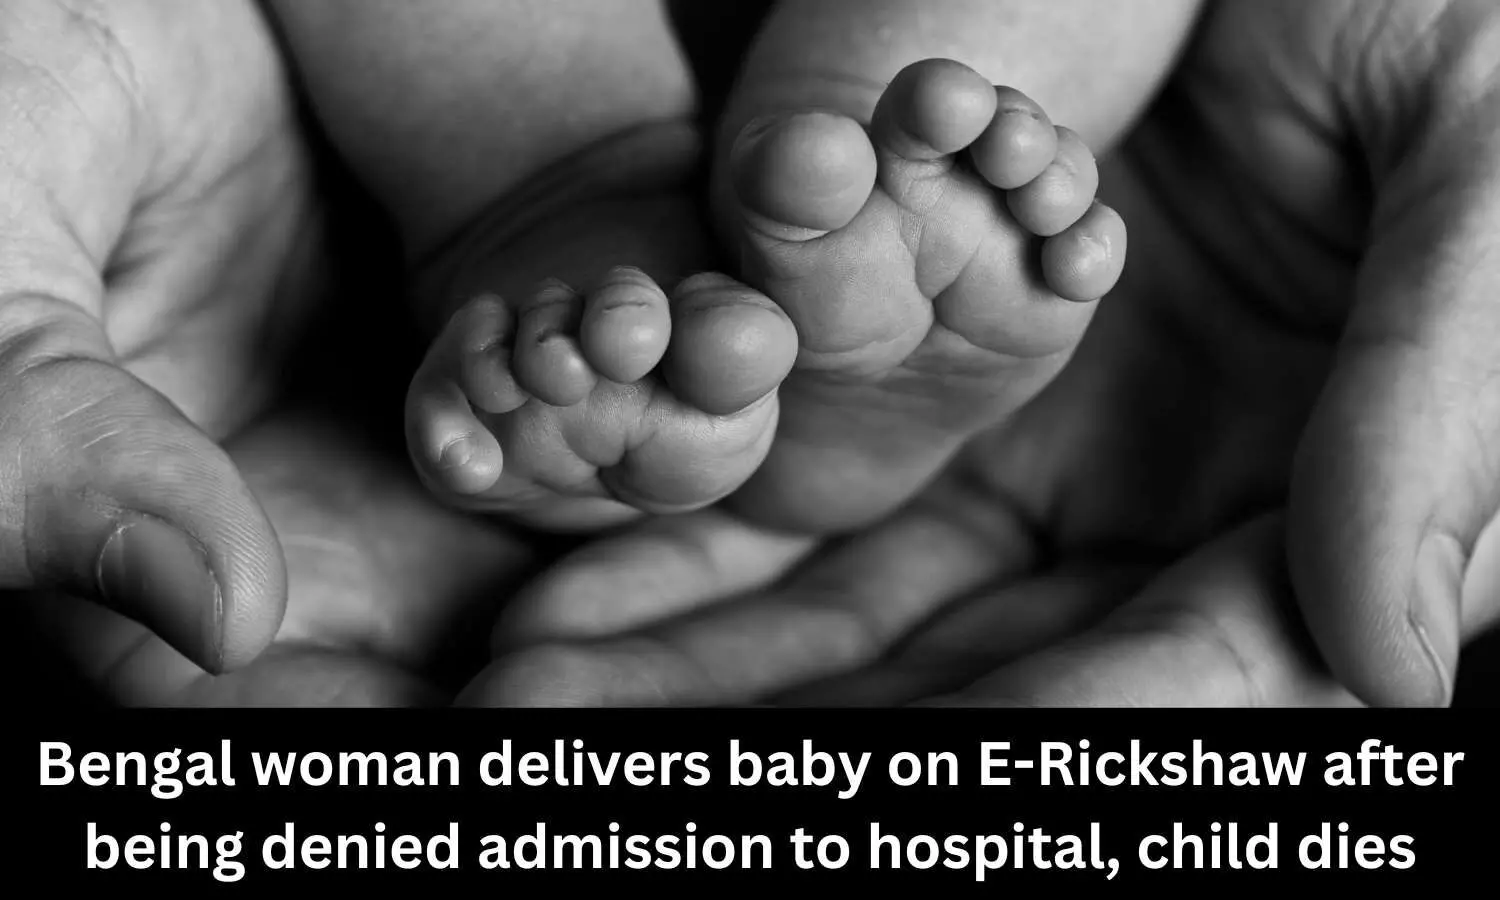 West Bengal: Woman delivers baby on e-Rickshaw after being denied admission to hospital, child dies